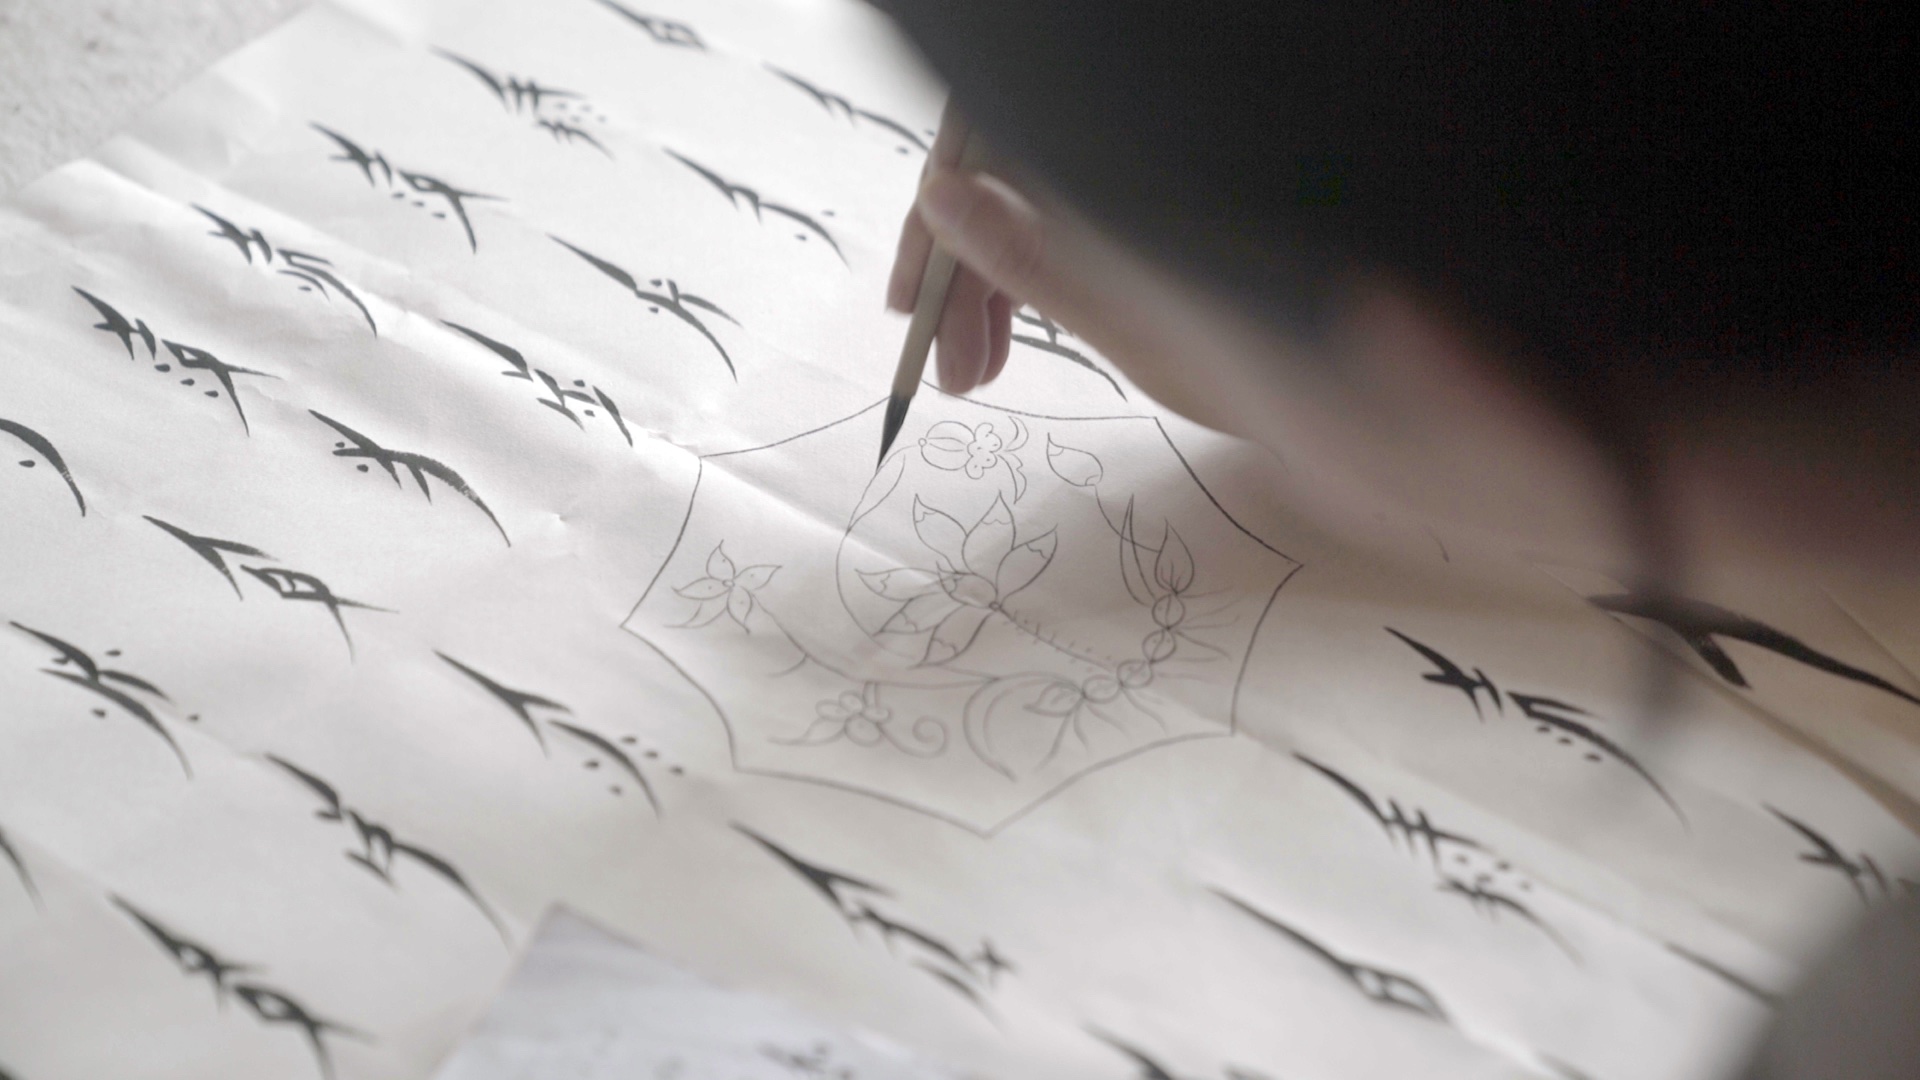 Image: Hu Xin's handwriting in Nüshu. Still from "Hidden Letters," 2022, directed by Violet Du Feng and Qing Zhao. A close-up in the film that shows the writing system "Nüshu." A right hand is seen holding a calligraphy brush. On the rice paper, vertical lines of slender characters, illegible to most, elegantly frame a octagon motif featuring a line drawing of a lotus. Photo credit: Jia Li.